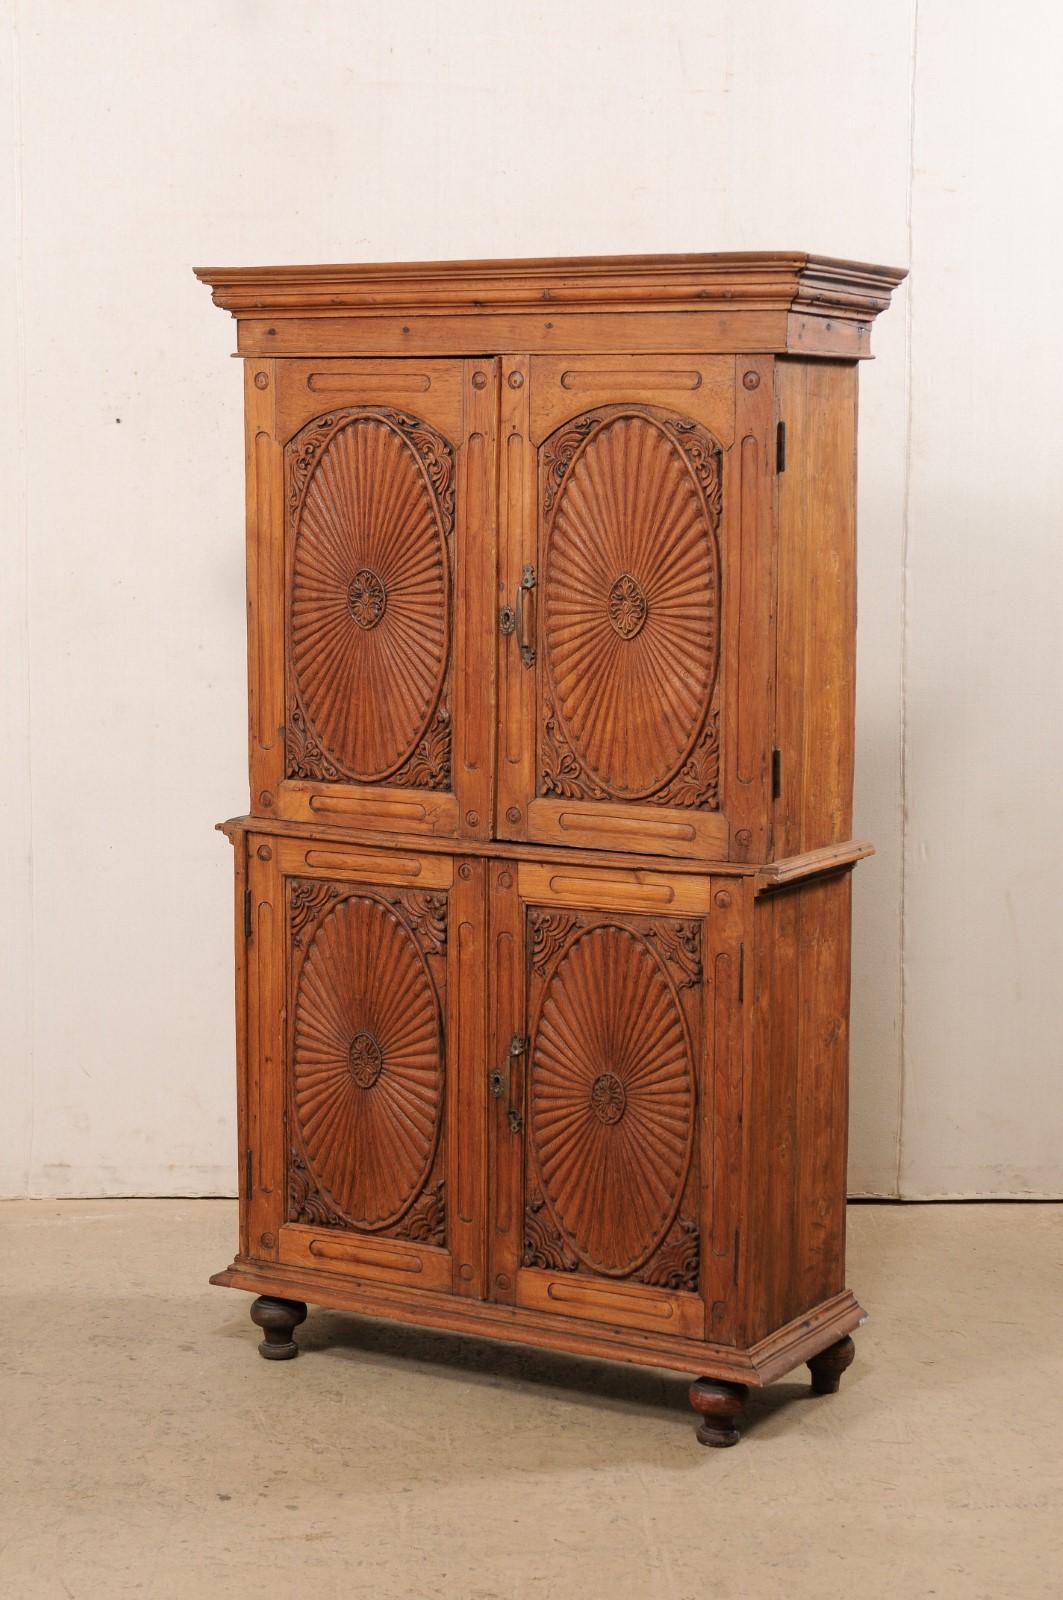 Tall British Colonial Teak-Carved Cabinet W/ Beautifully Carved Doors, 19th C 3